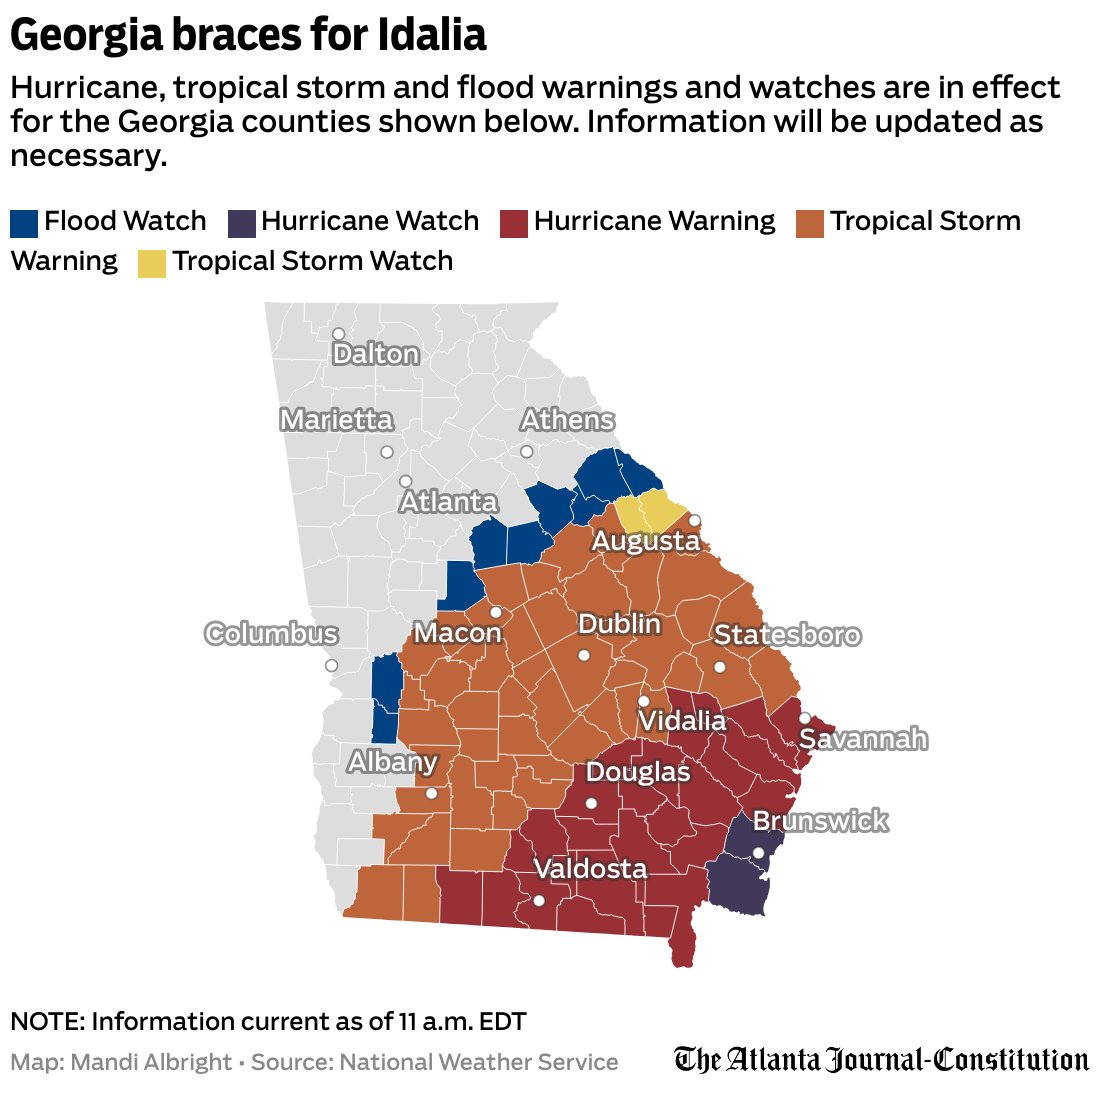 With 61,000 without power, Georgia is preparing for more Idalia threats. Gov. Kemp said authorities are preparing for flash flooding, downed trees and heavy rainfall as the storm carves a menacing path from Florida